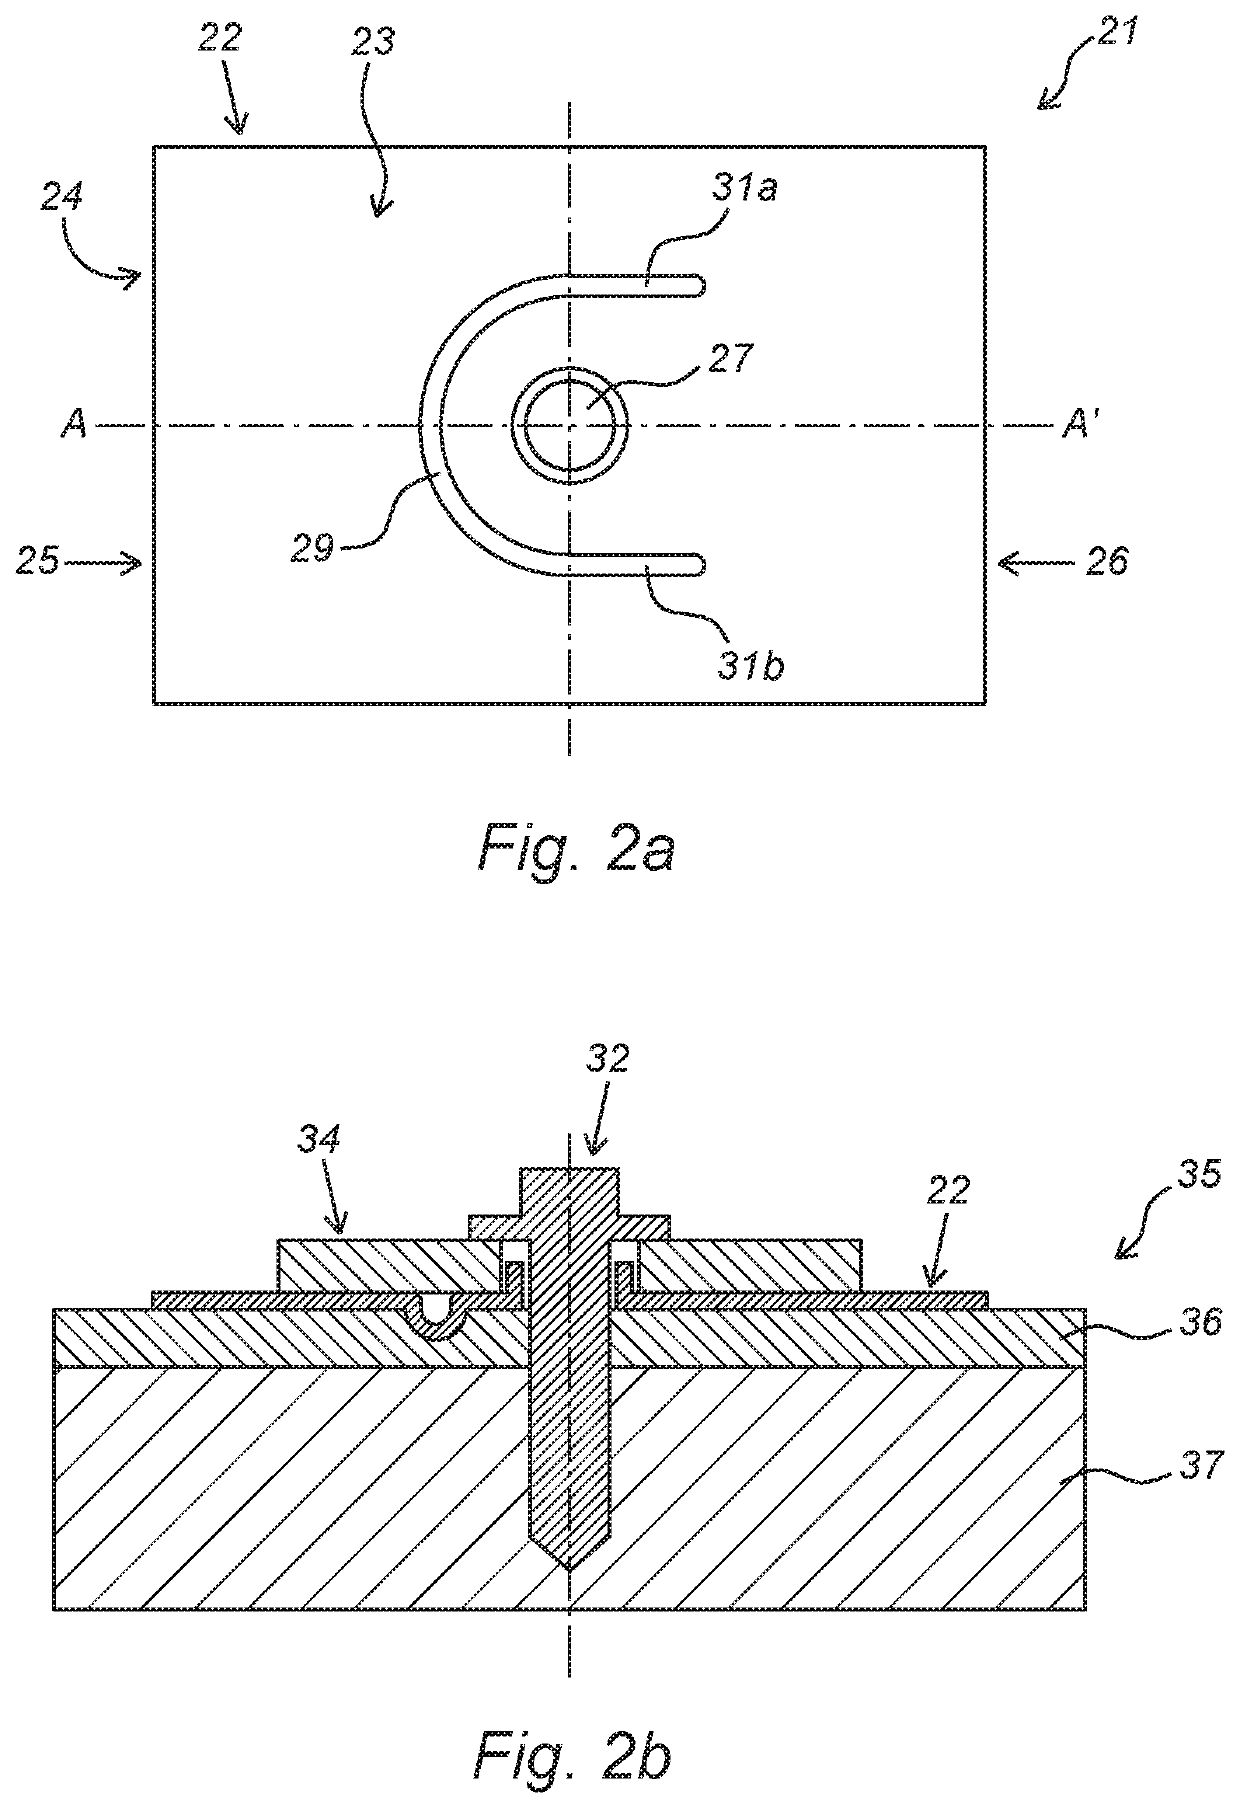 Fastening structure and method for fitting a coupling profile to a pitched roof covered with shingles